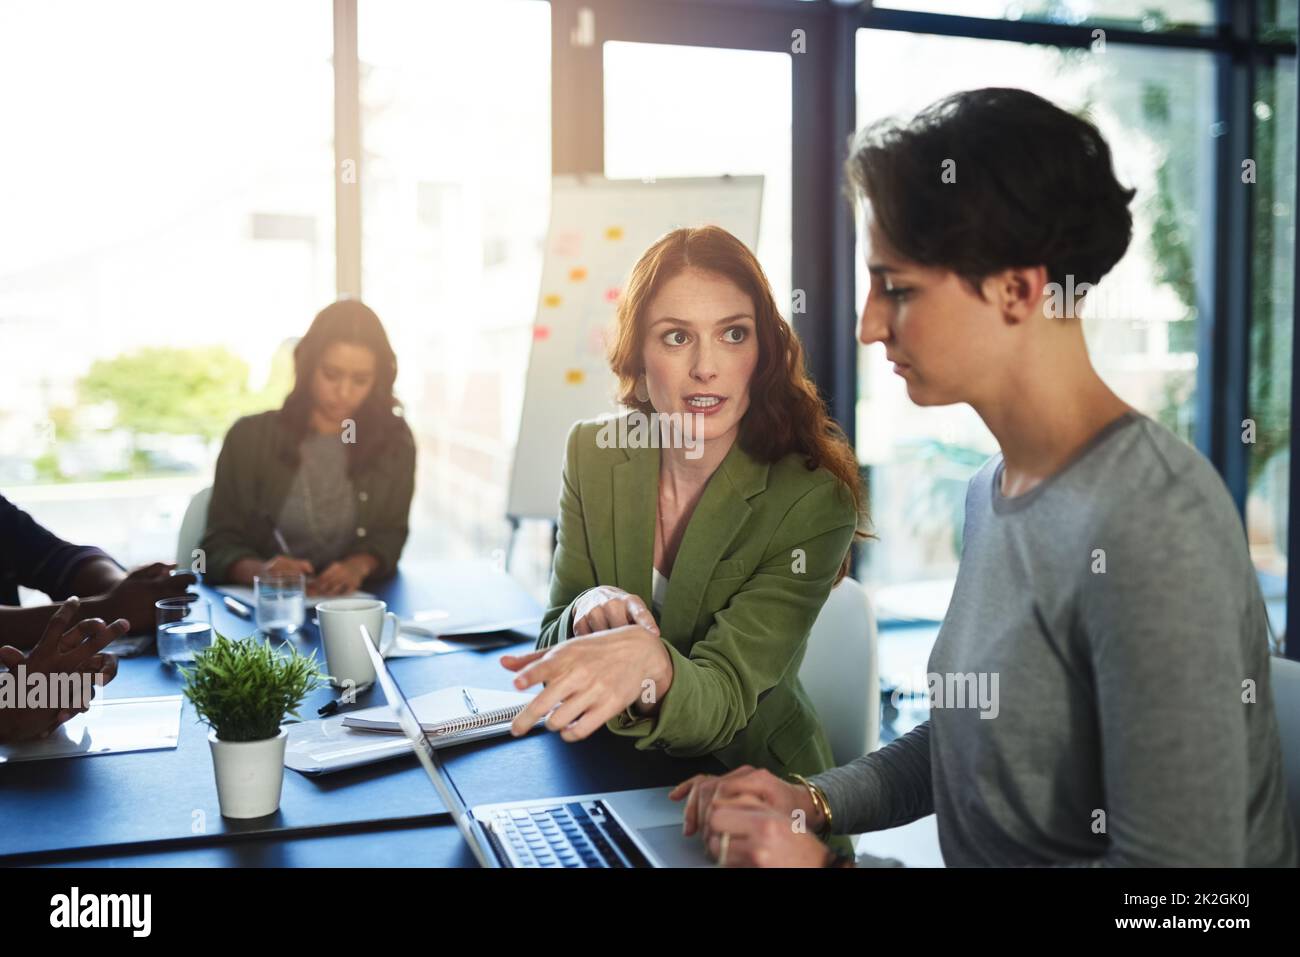 Putting the details into perspective. Shot of a group of businesswomen working in an office. Stock Photo